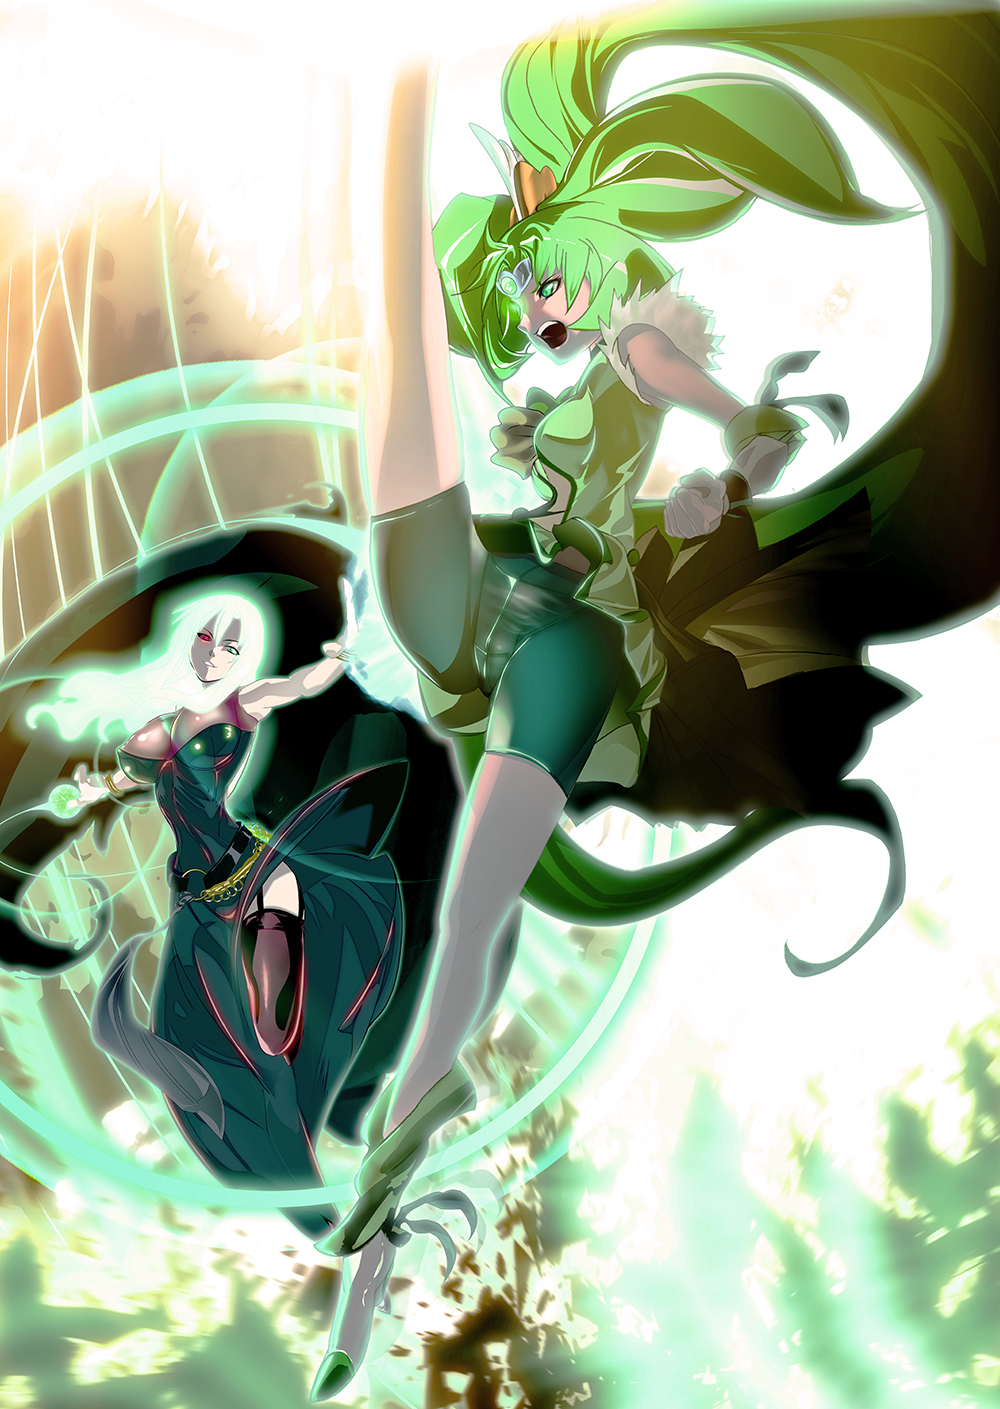 2girls angry battle bike_shorts breasts clenched_hand cure_march dress green green_dress green_eyes green_hair heterochromia highres hybrid_pandap large_breasts leg_up long_hair magical_girl majorina midorikawa_nao multiple_girls open_mouth ponytail precure purple_legwear red_eyes revision shoes smile thigh-highs thigh_strap tri_tails